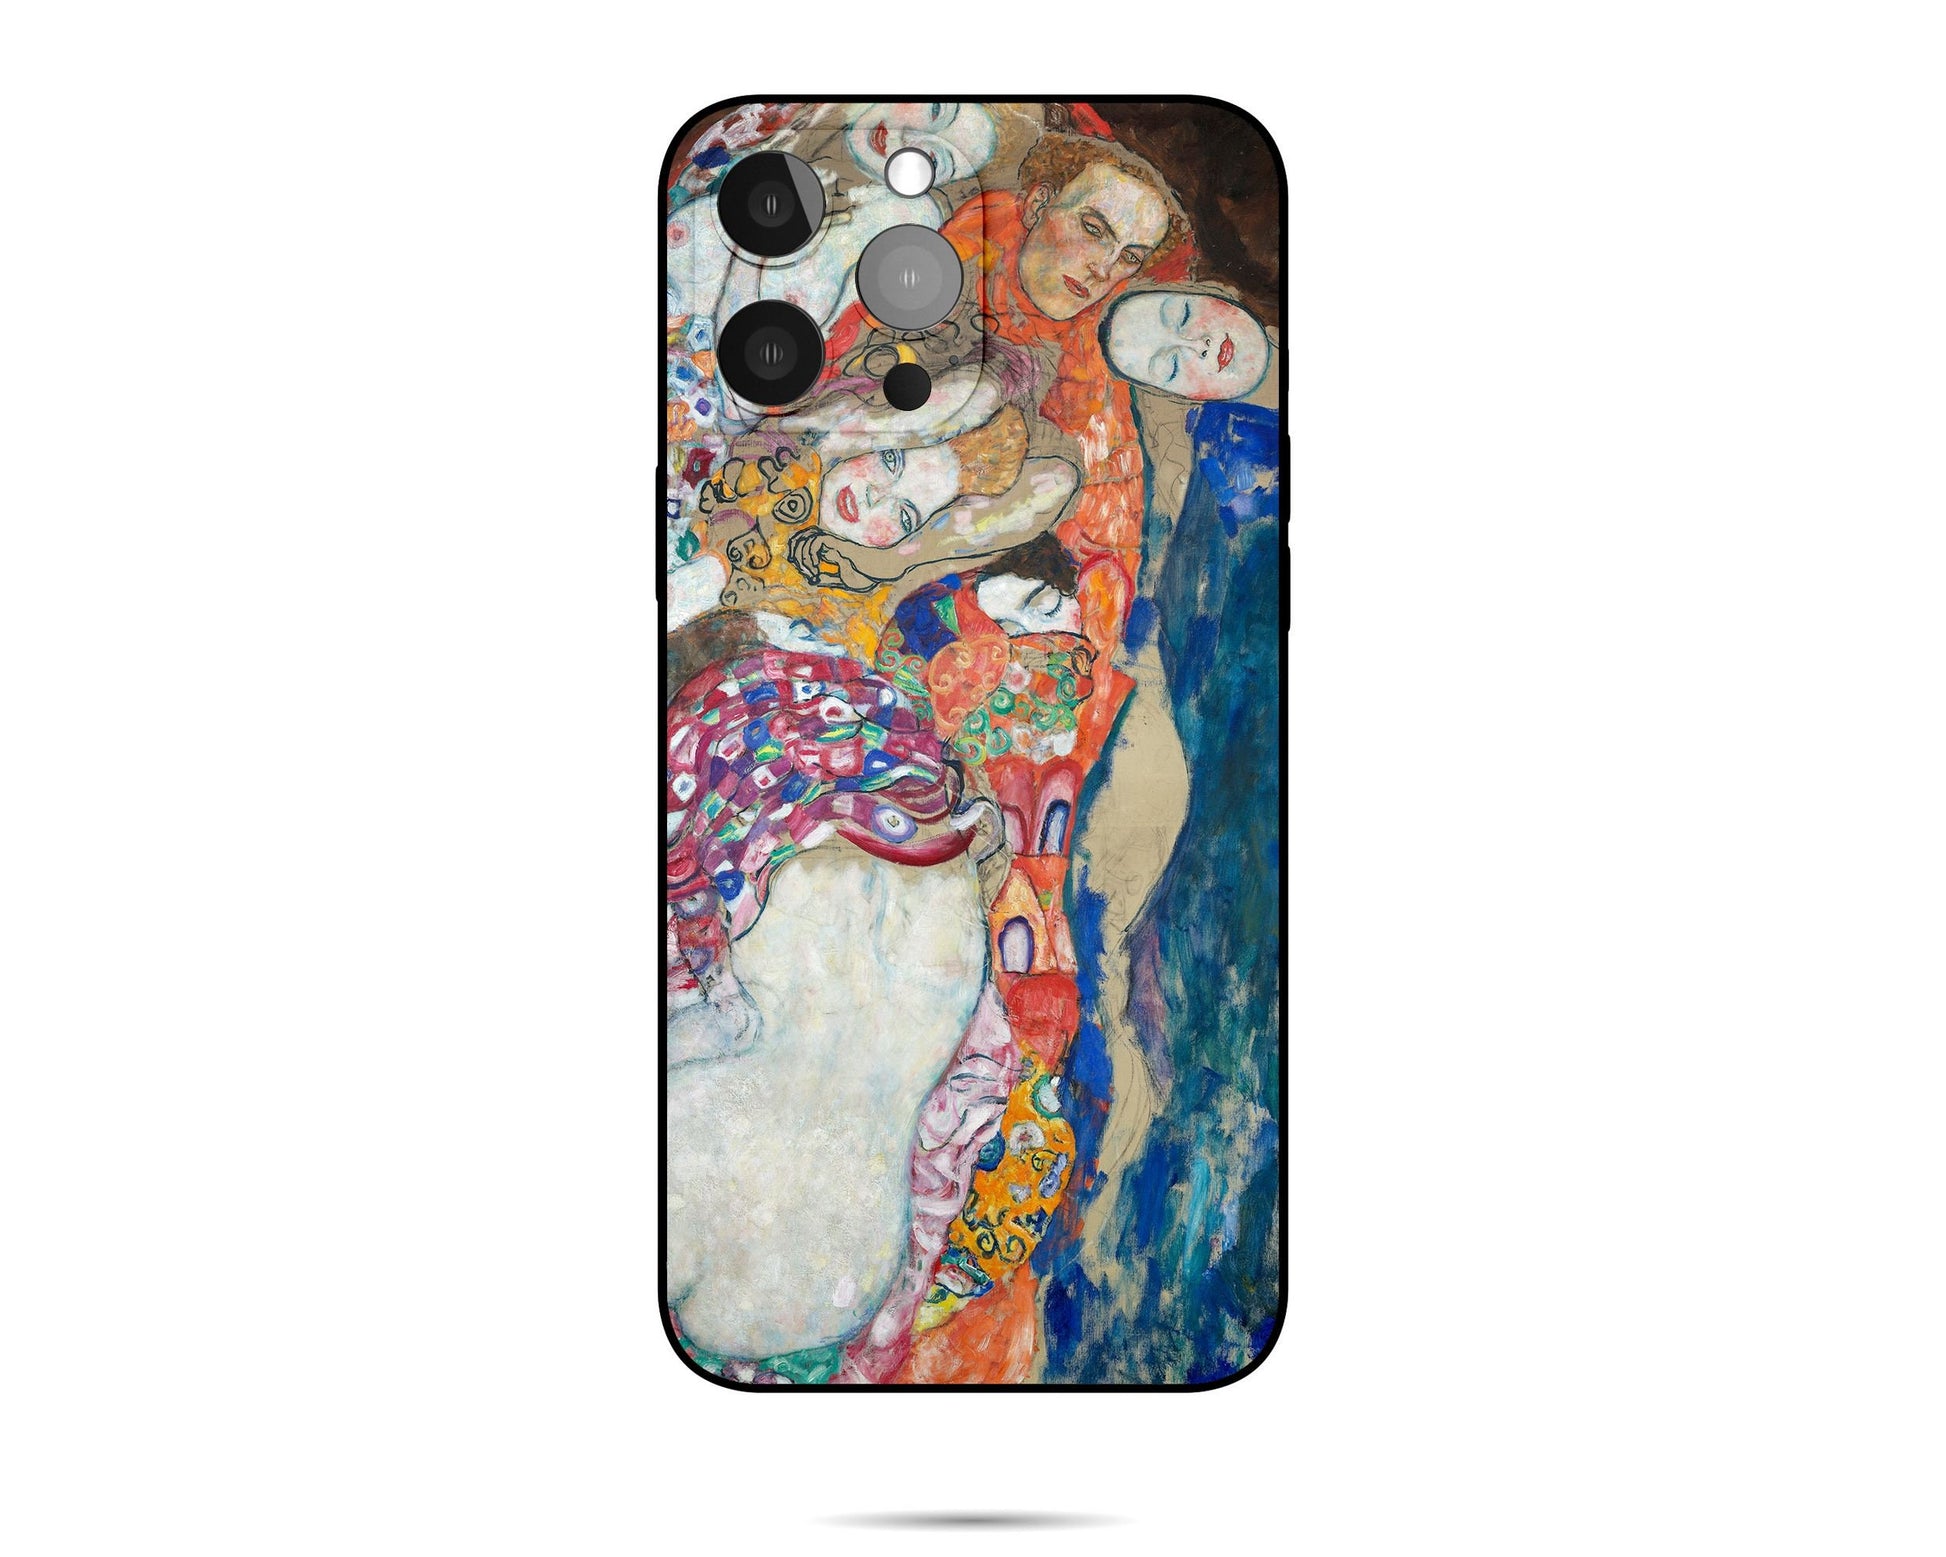 Iphone Case Of Gustav Klimt Painting The Bride, Iphone Cover, Iphone 12 Pro Case, Iphone Se 2020, Art Nouveau, Vivid Color, Aesthetic Iphone